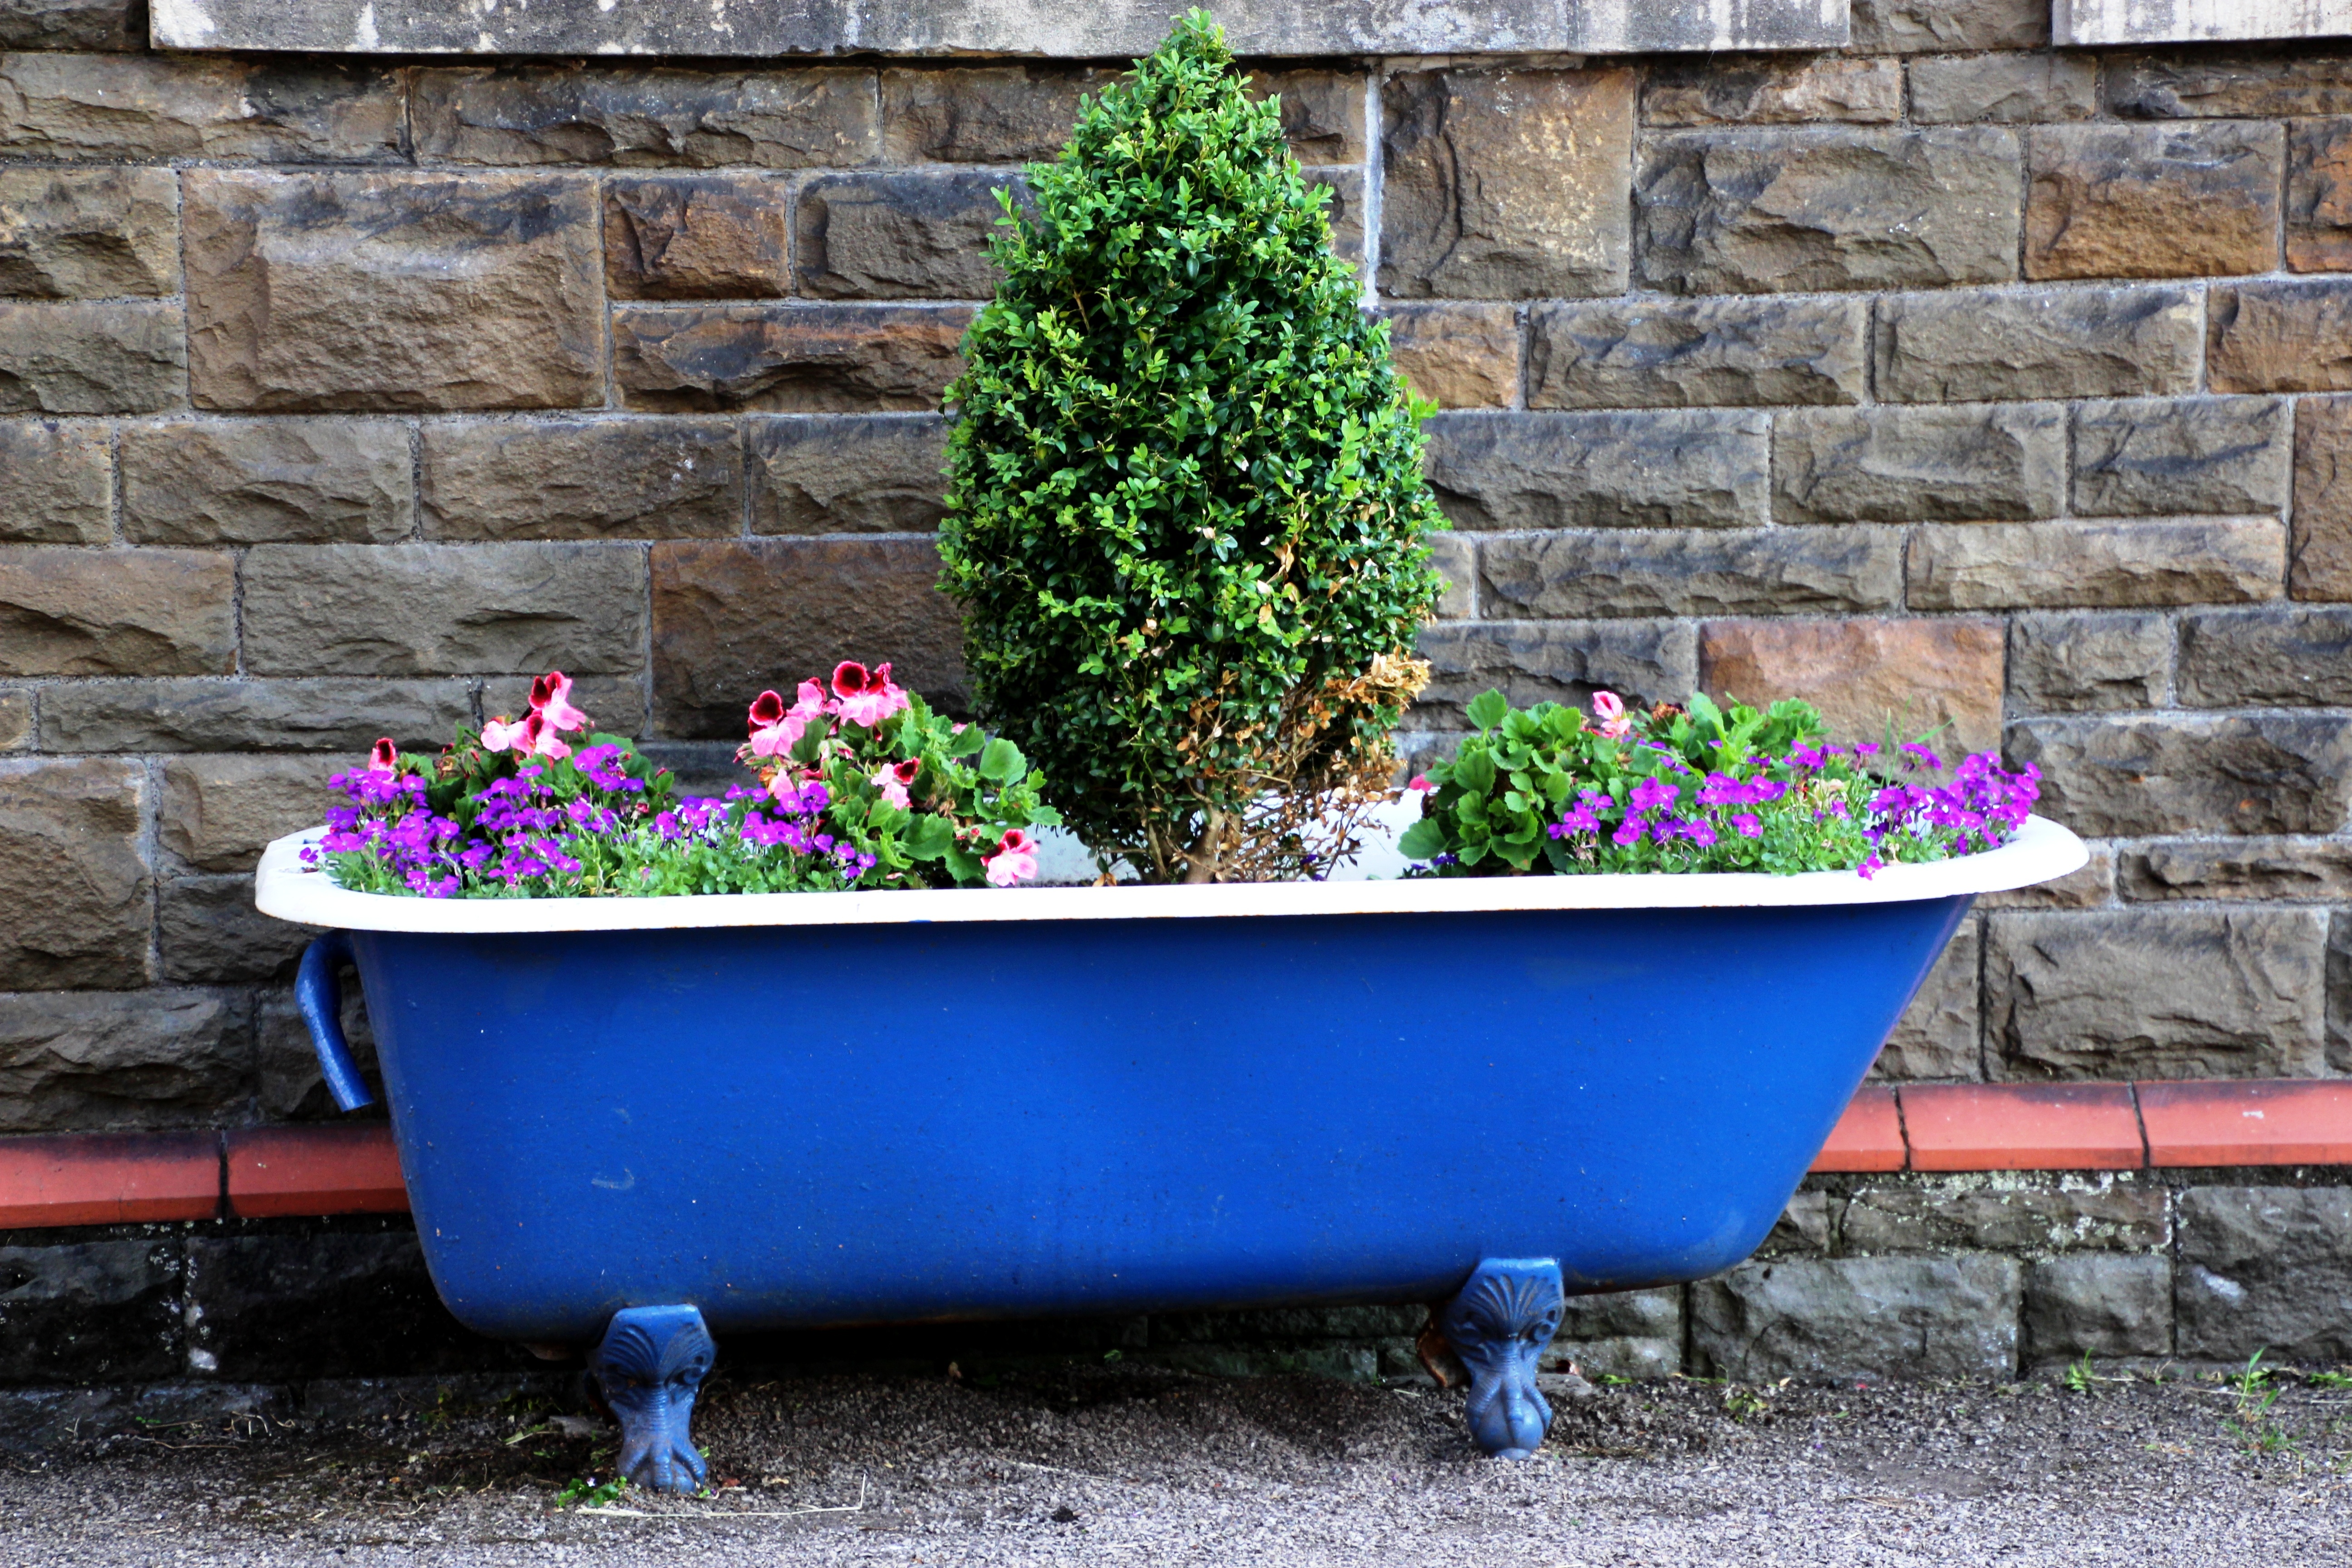 Photo of flowers and a small tree planted in a blue bathtub.